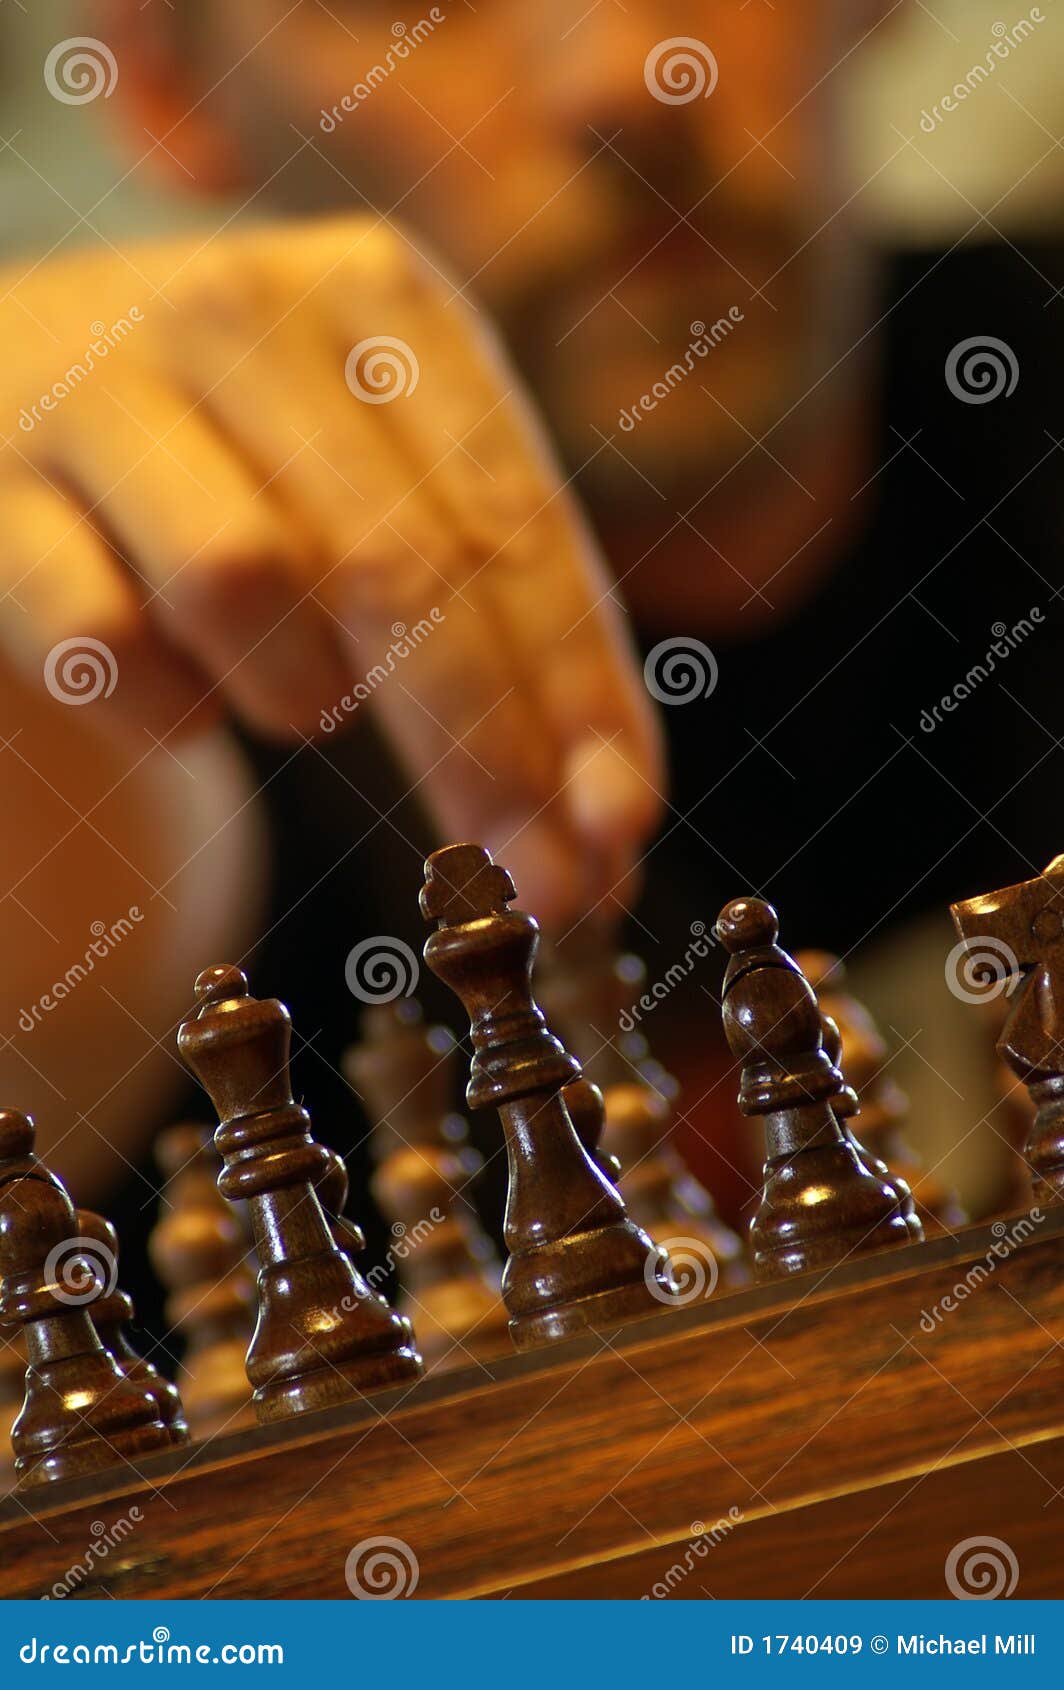 Child Thinking about Next Move Stock Image - Image of move, battle: 34909255